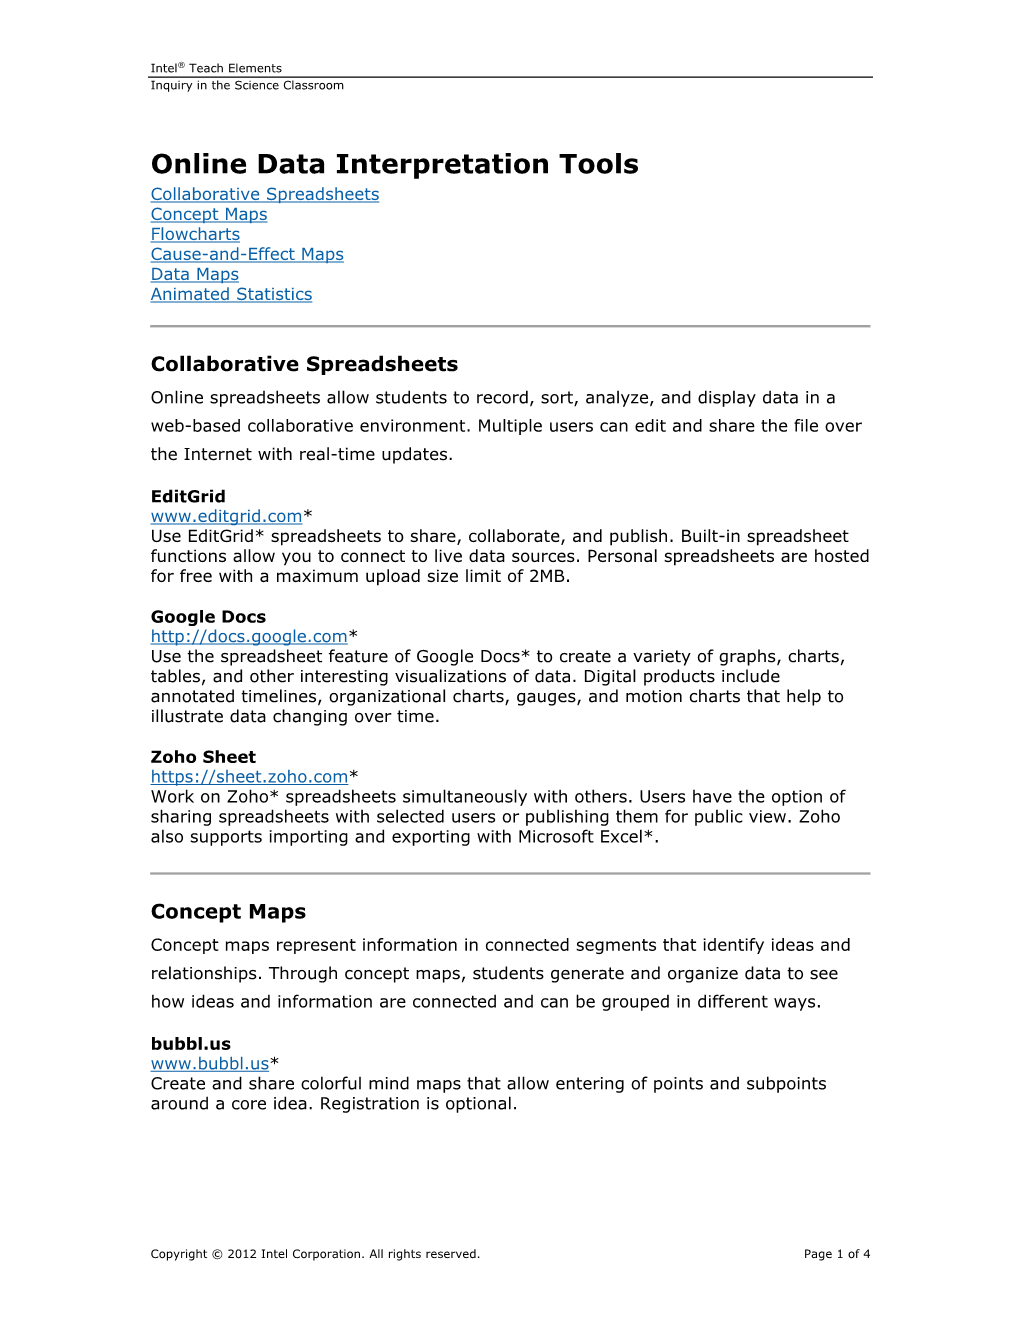 Online Data Interpretation Tools Collaborative Spreadsheets Concept Maps Flowcharts Cause-And-Effect Maps Data Maps Animated Statistics